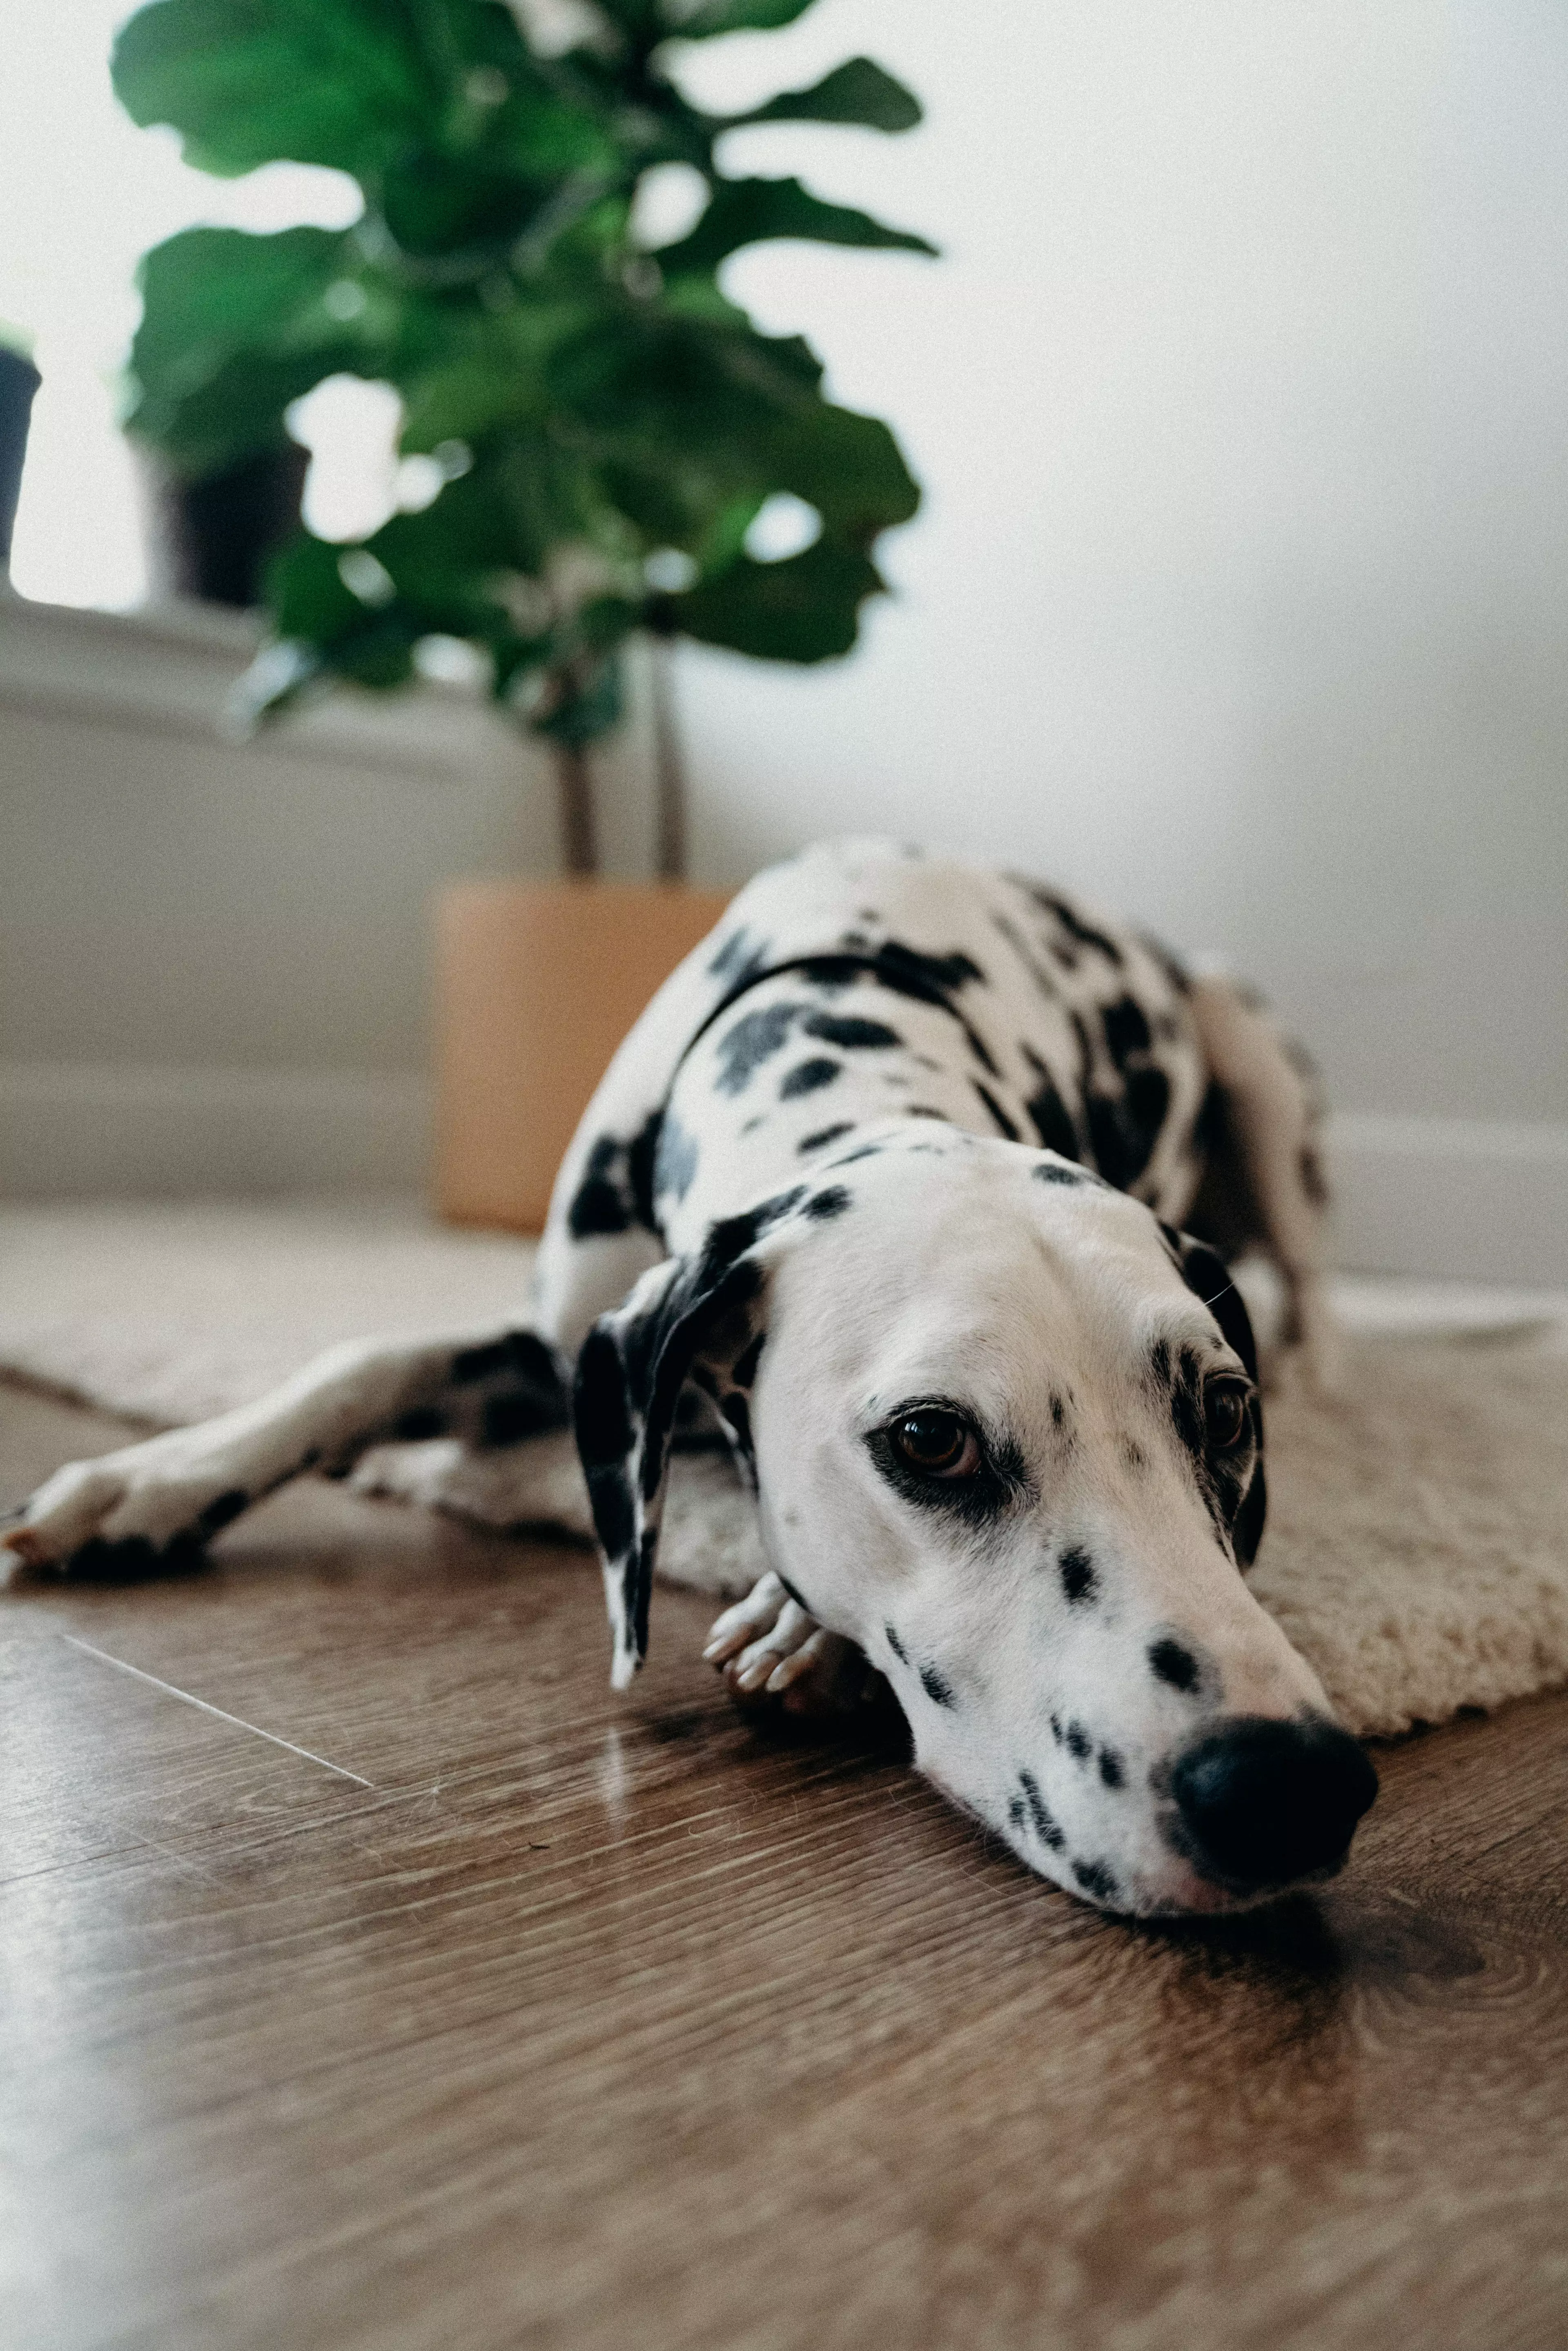 Dalmatians have officially been named as the world's cutest dog breed (